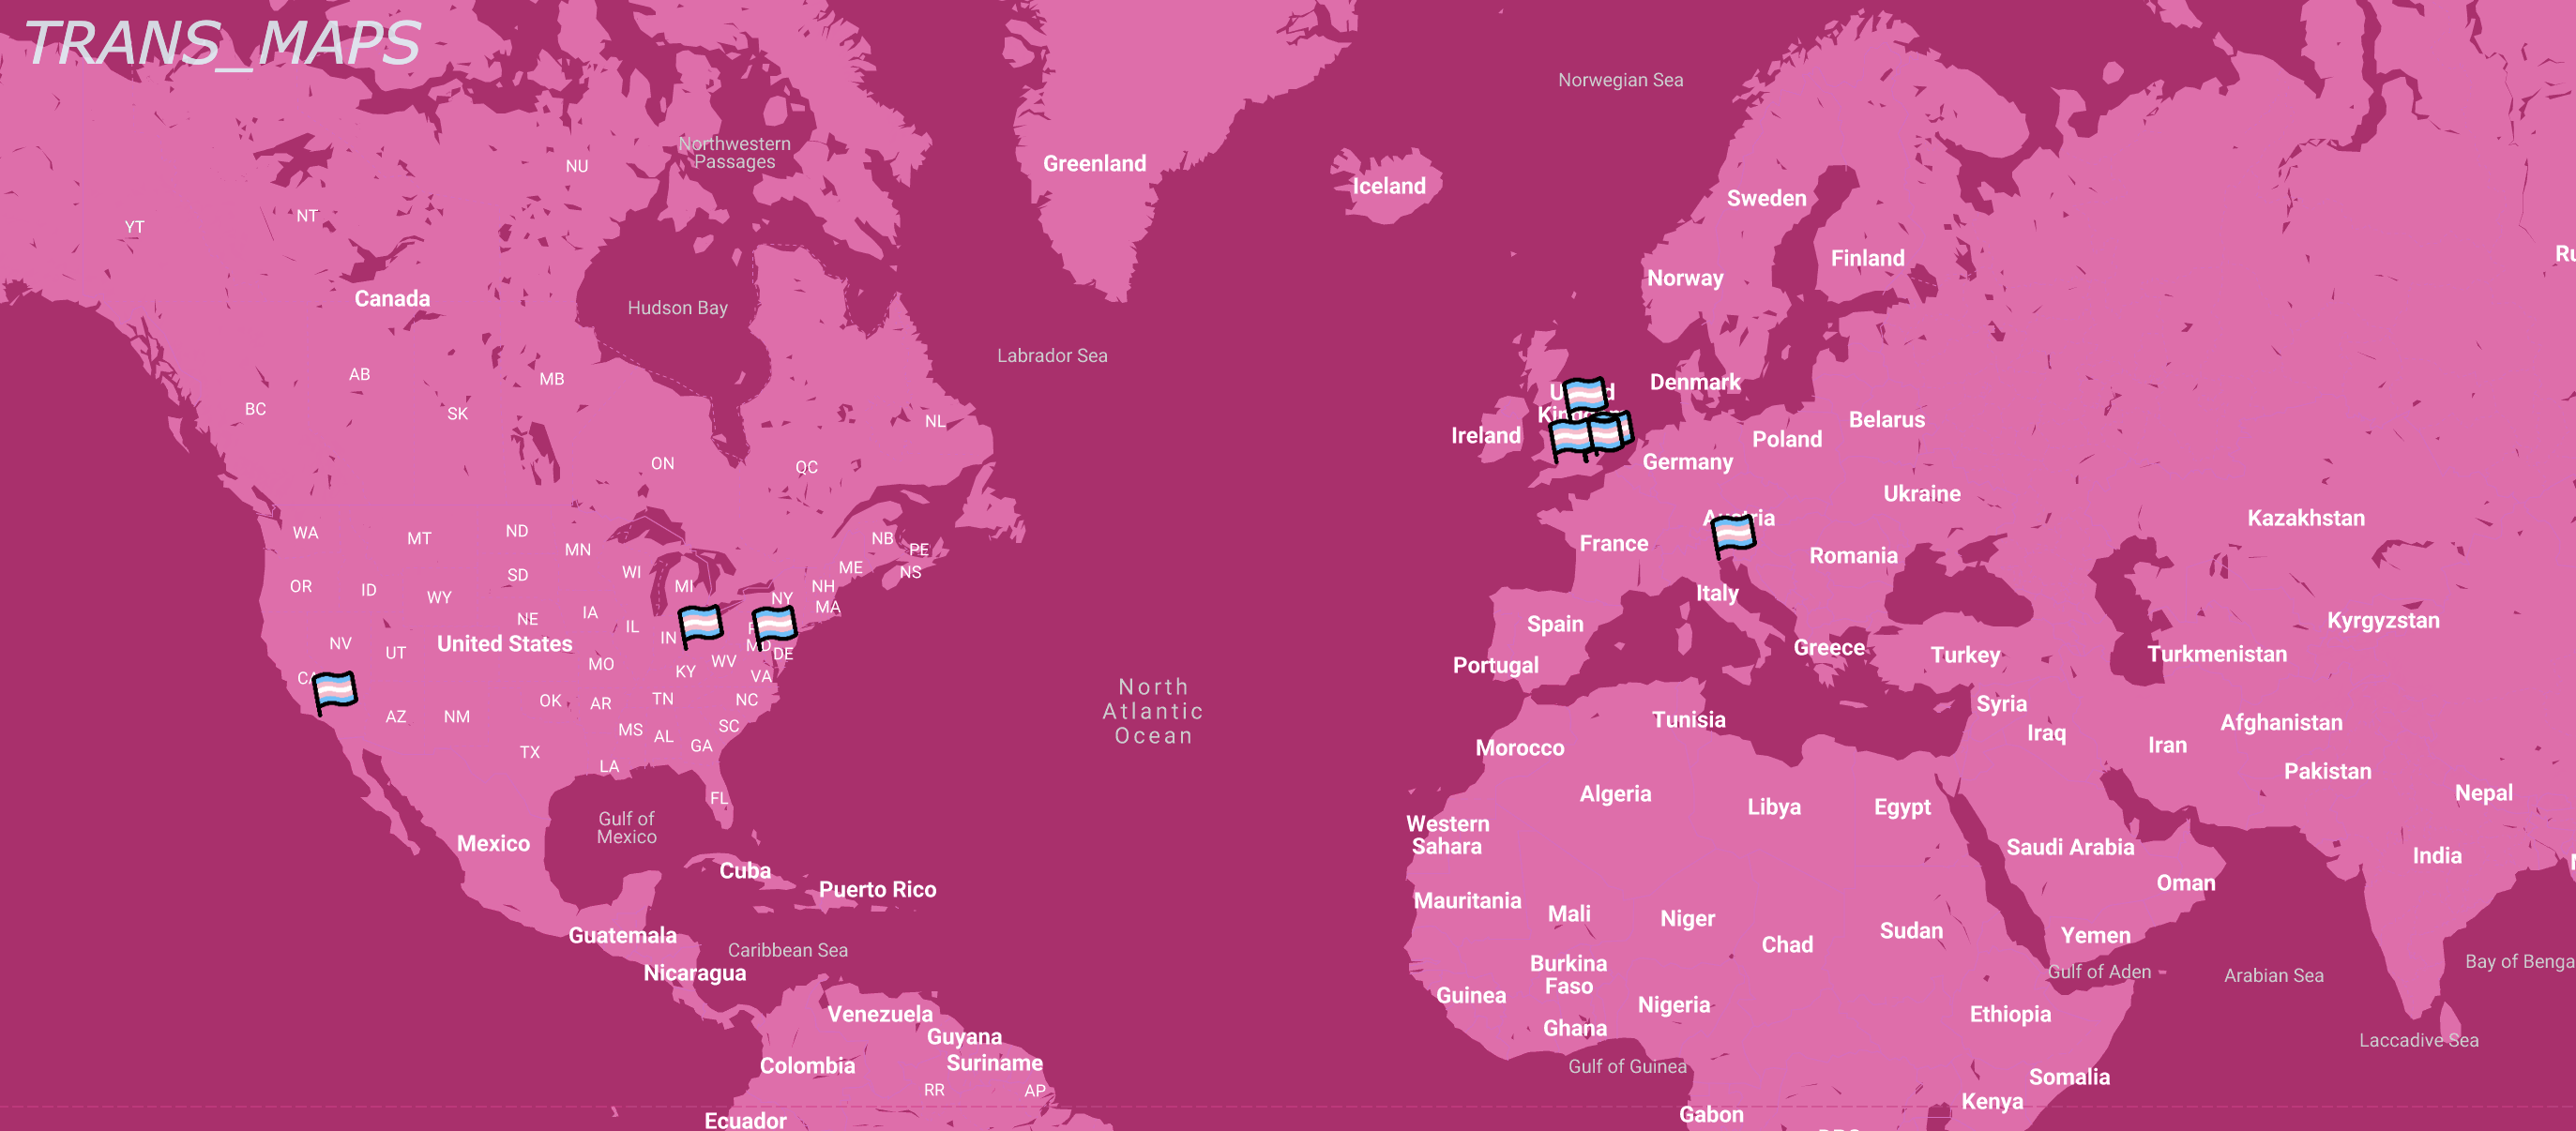 A pink map of the world with Trans flags planted in different areas. In the top left of the image it says 'TRANS MAPS'